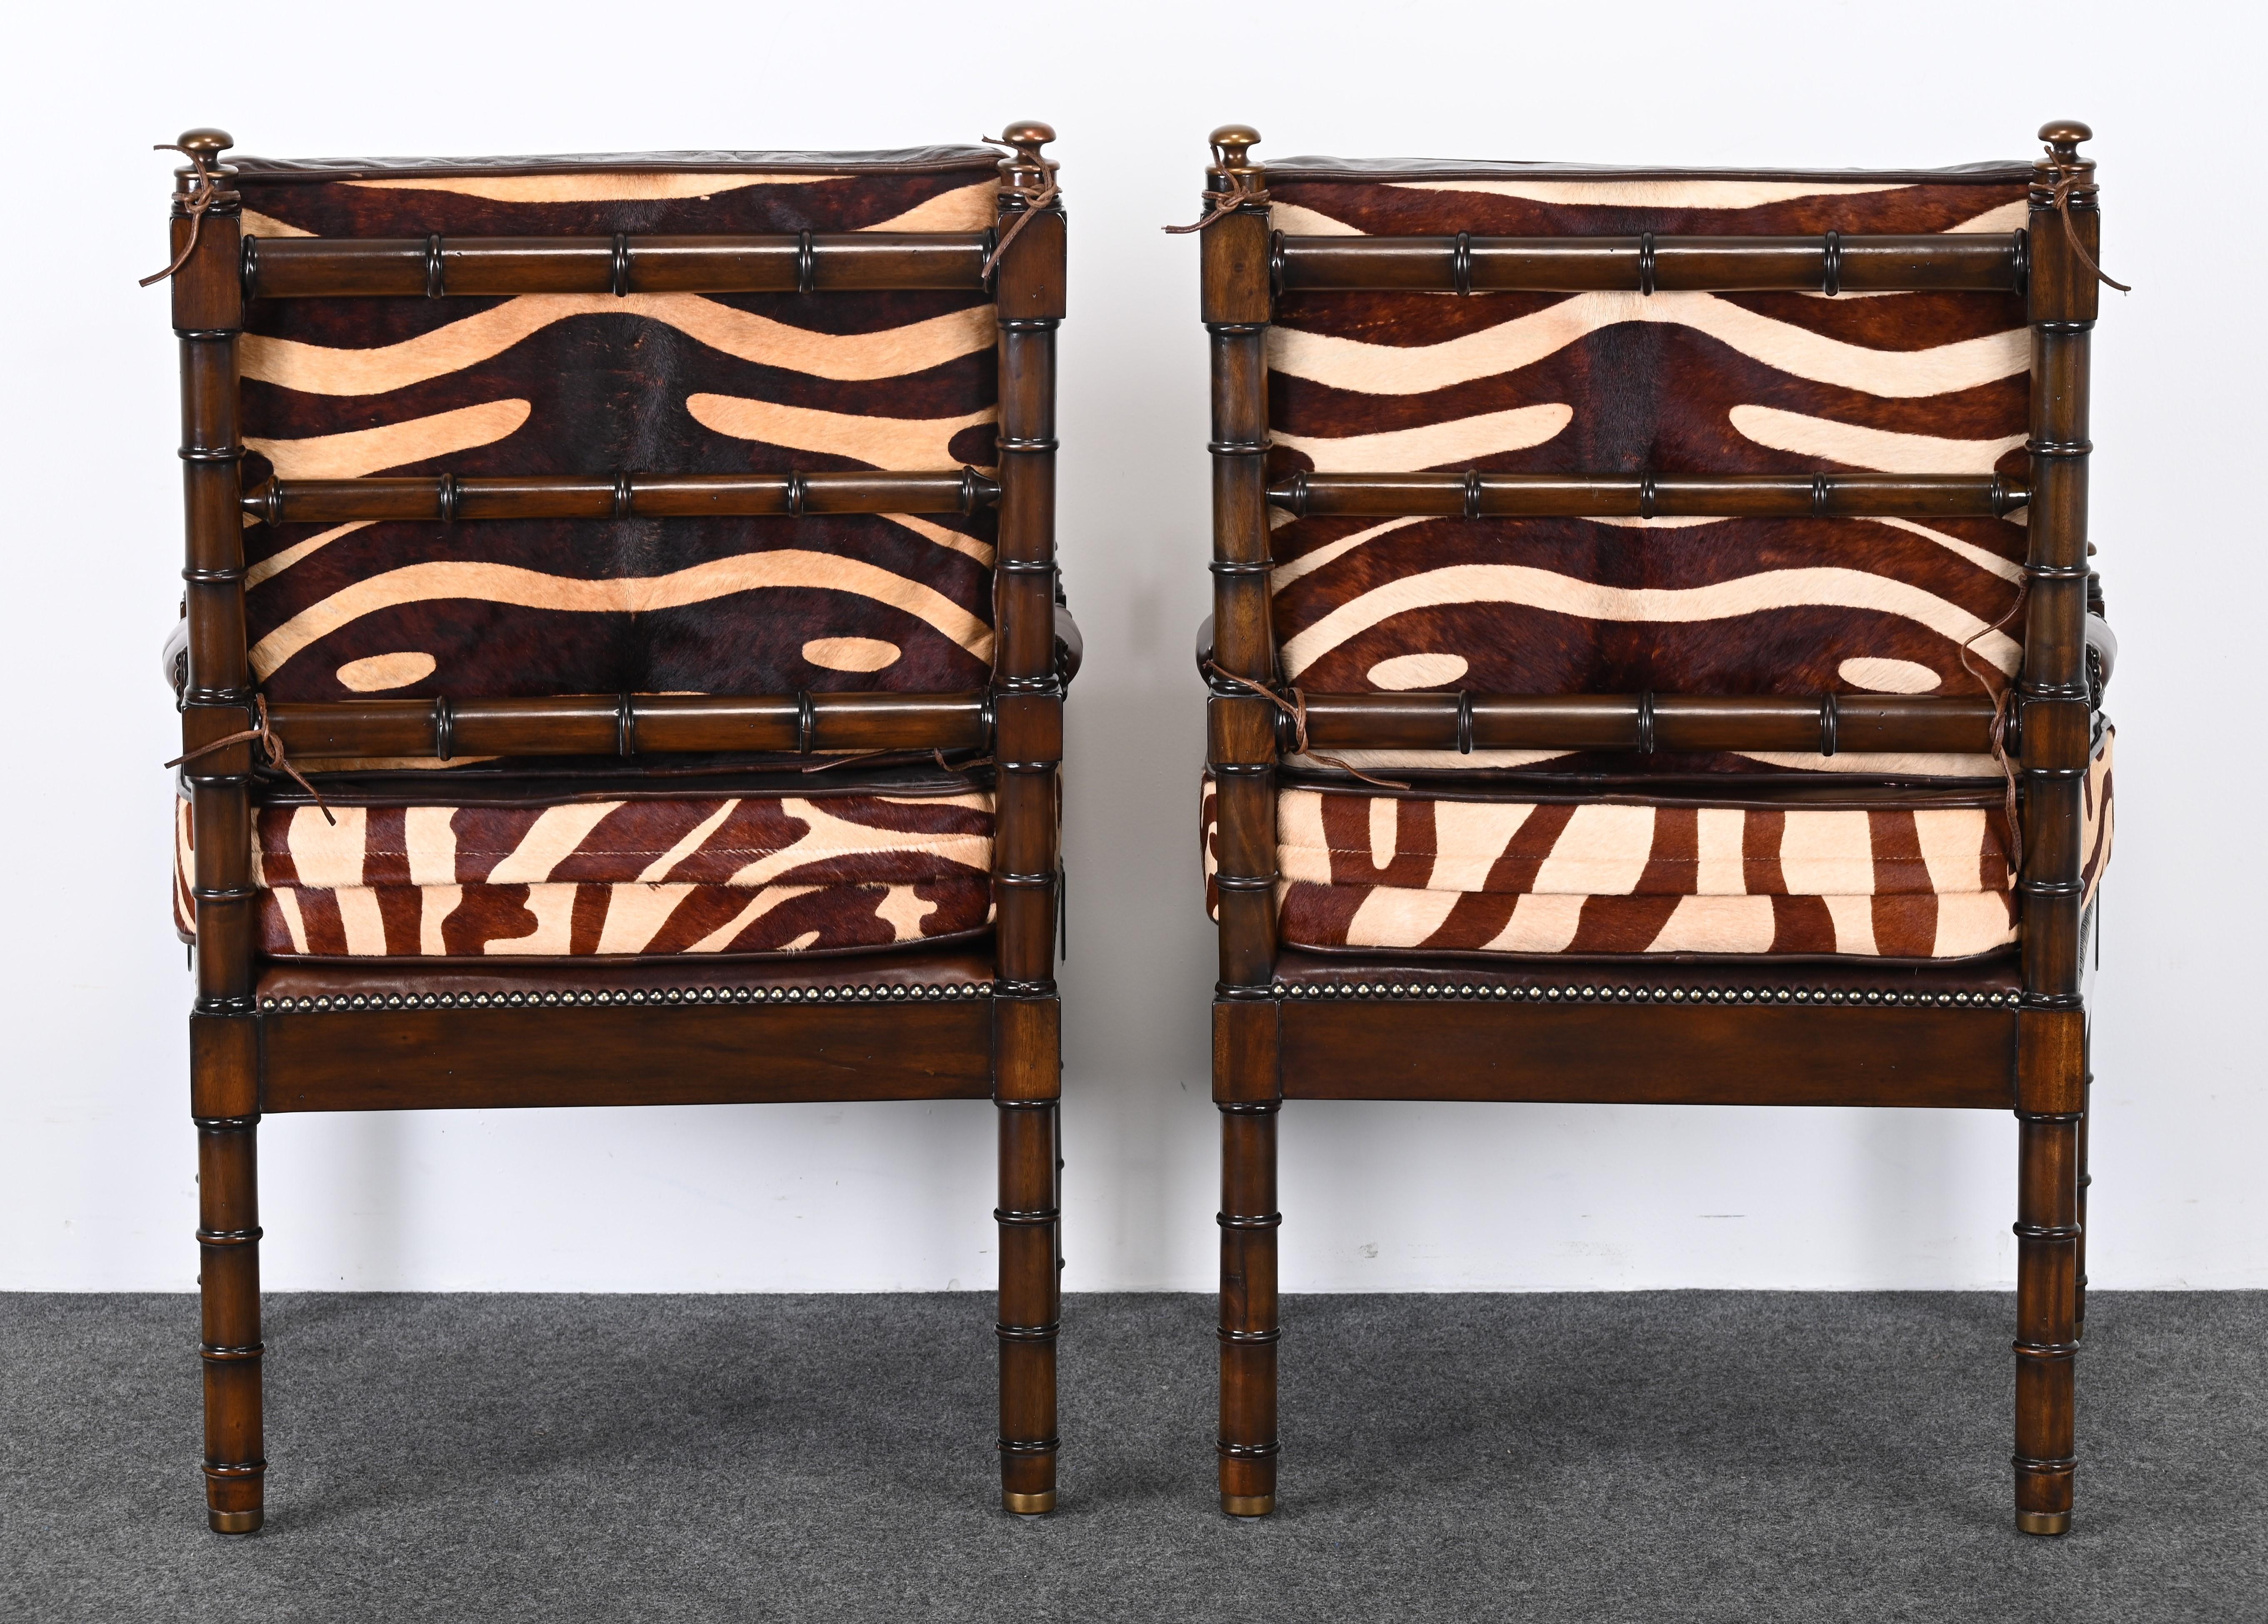 Maitland Smith Bamboo Armchairs with Cowhide Zebra Print Leather Seats, 1990s For Sale 4